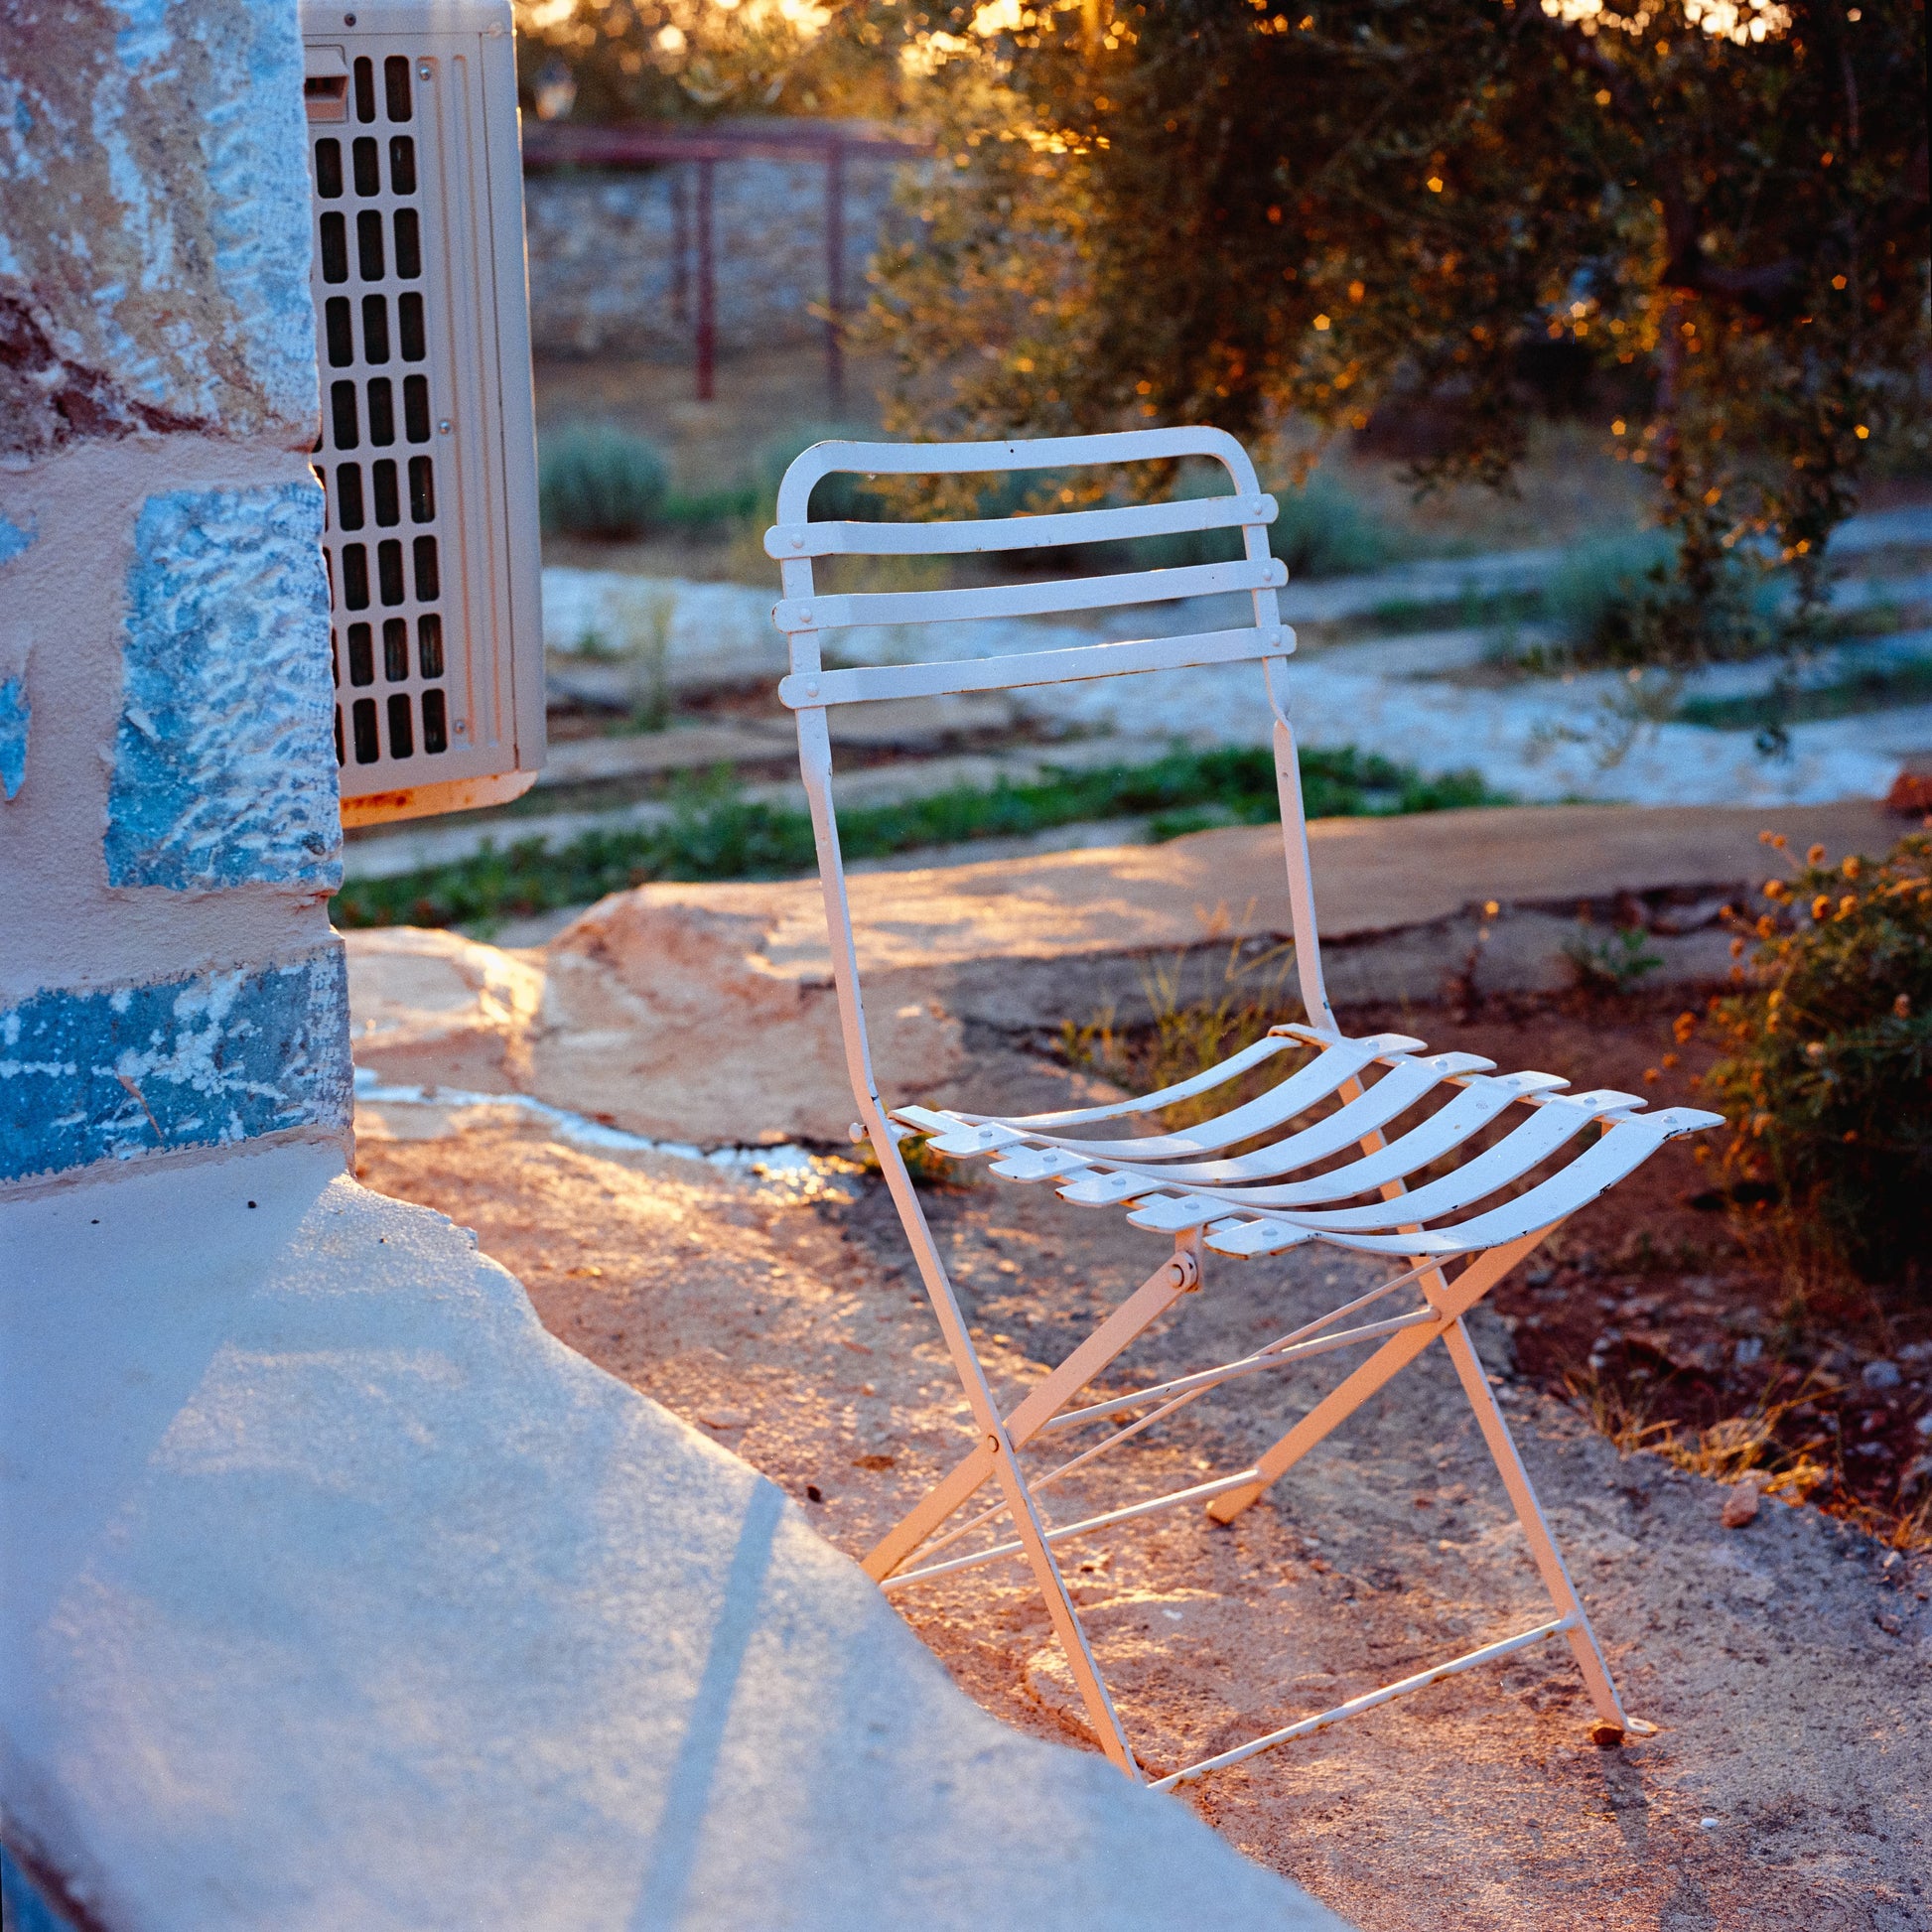 A square frame with a white metal chair with grills standing in the middle. Itss eat and back trace a similar shape as a stone porch on the foreground. The sun casts rays down the middle of the frame, and small shadows from the chair. There is a warmth and stillness in the scene.